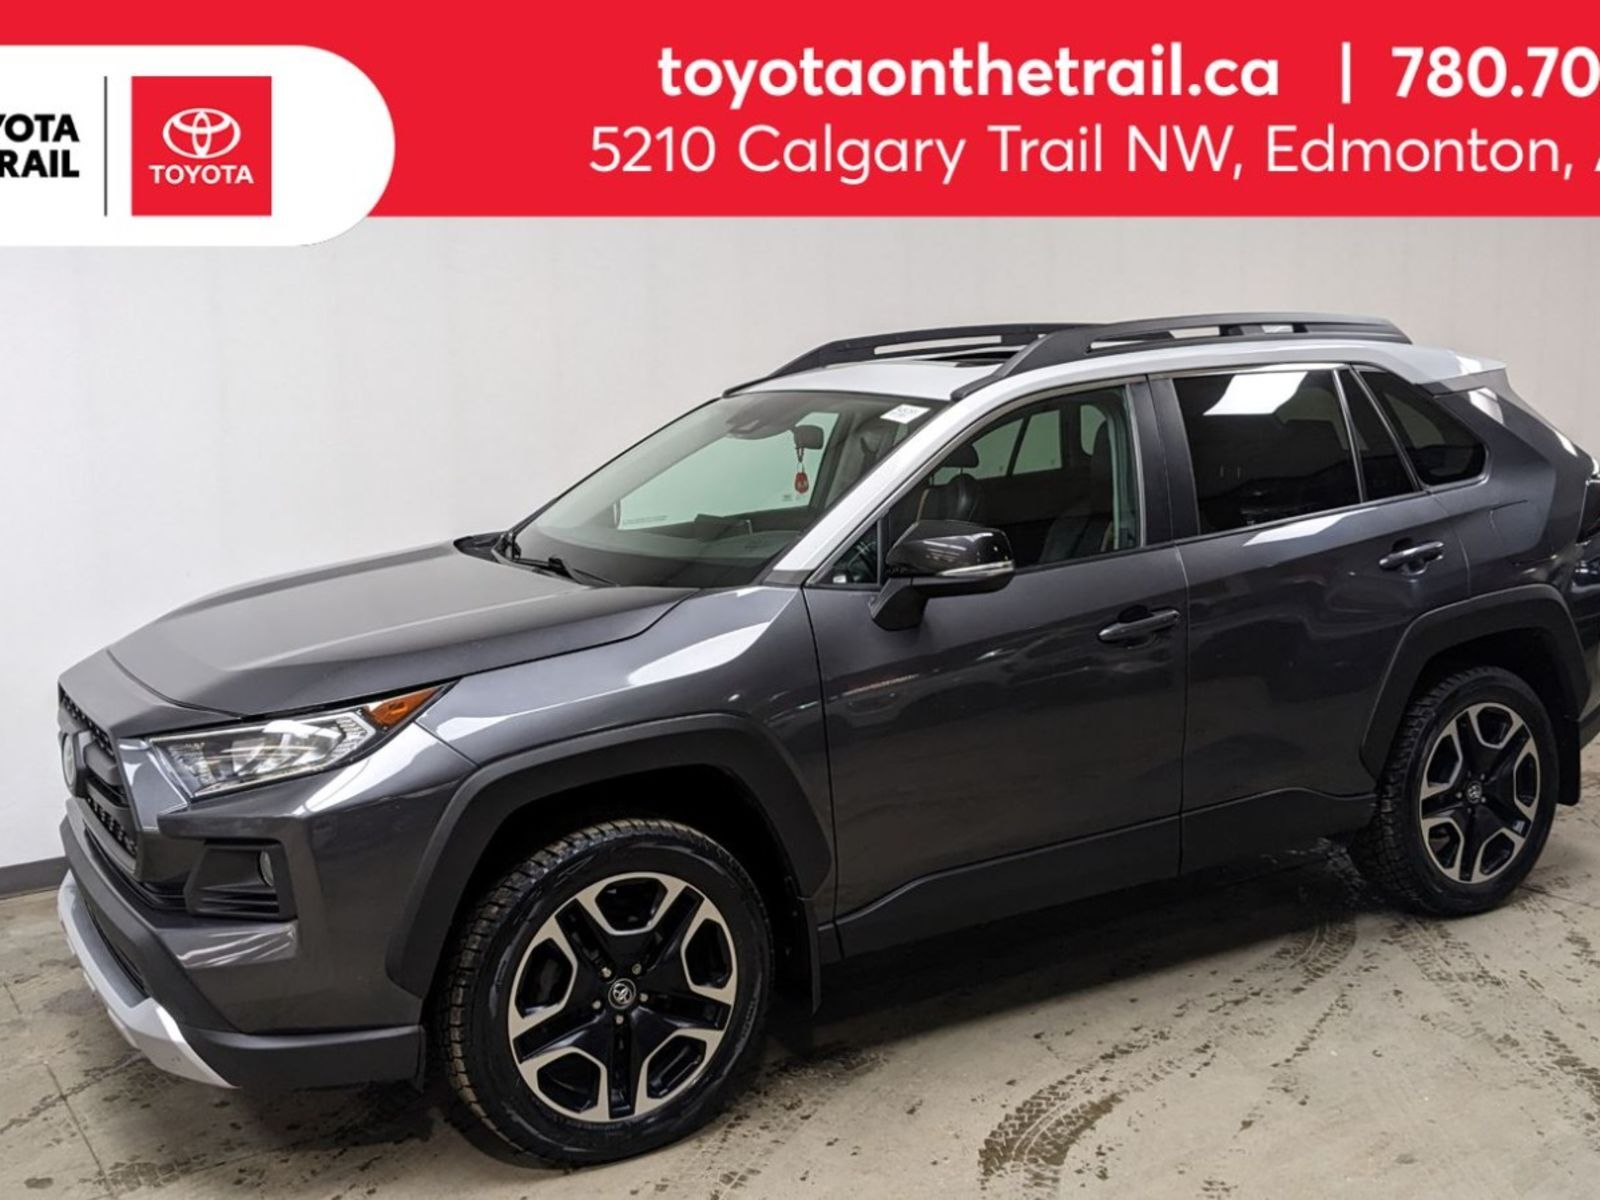 2019 Toyota RAV4 TRAIL AWD; LEATHER, WINTER TIRES, TRAILER HITCH, S